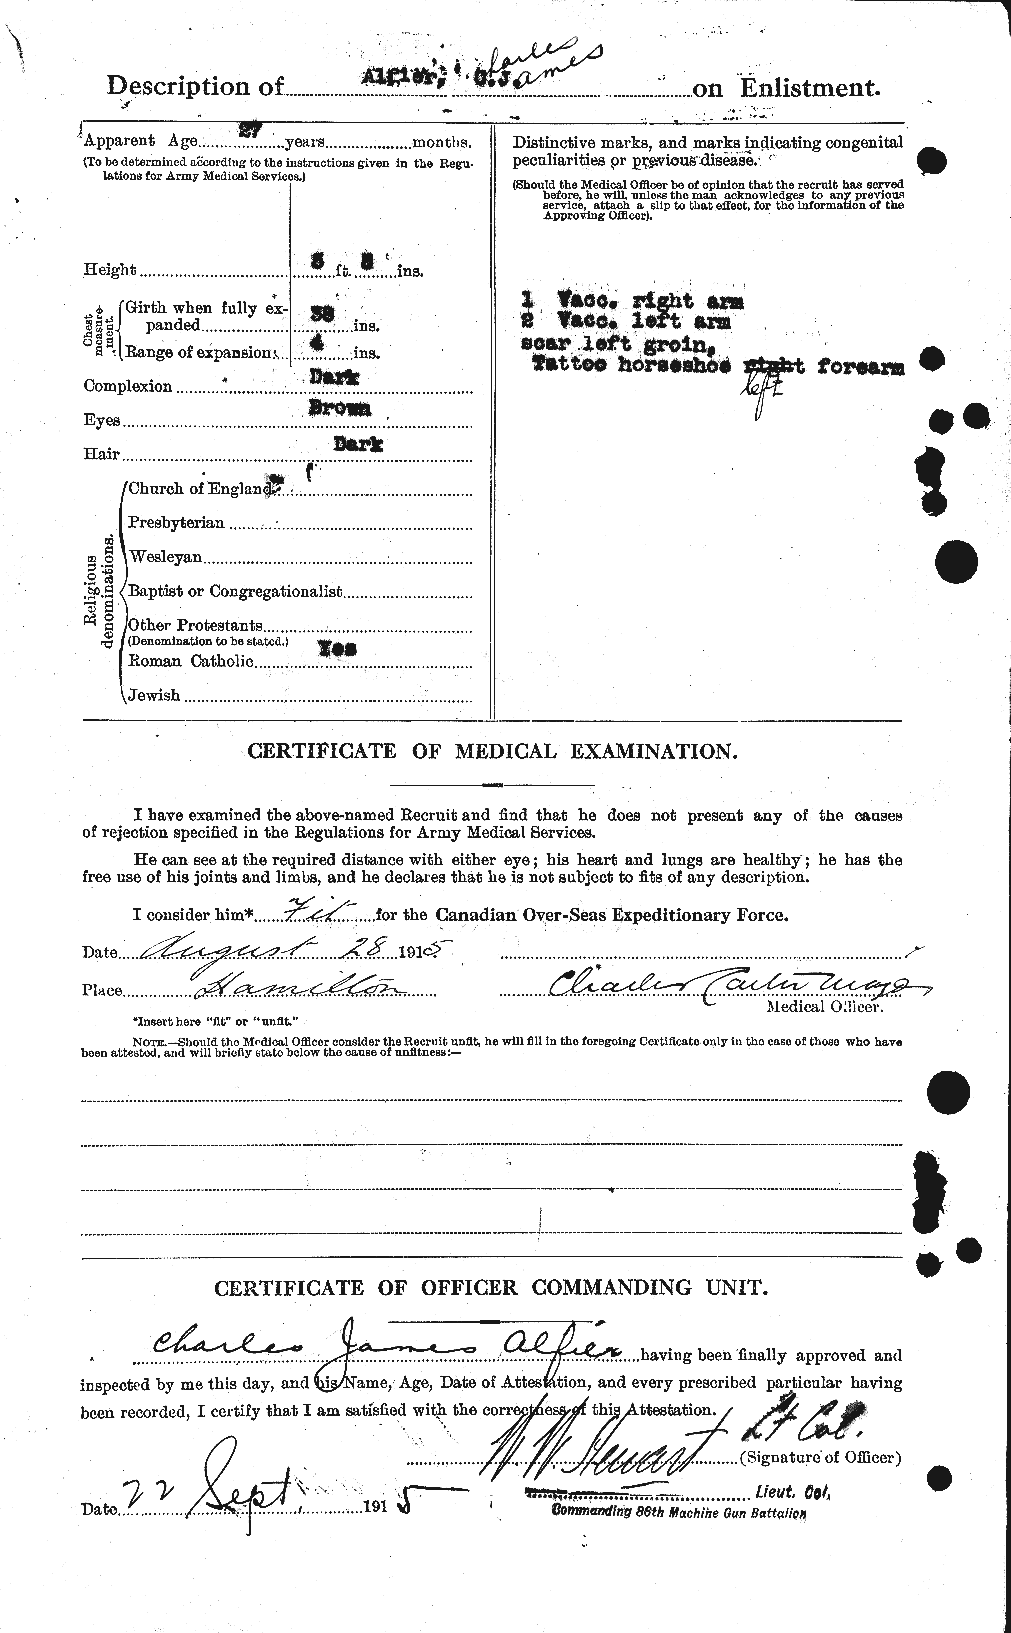 Personnel Records of the First World War - CEF 204474b